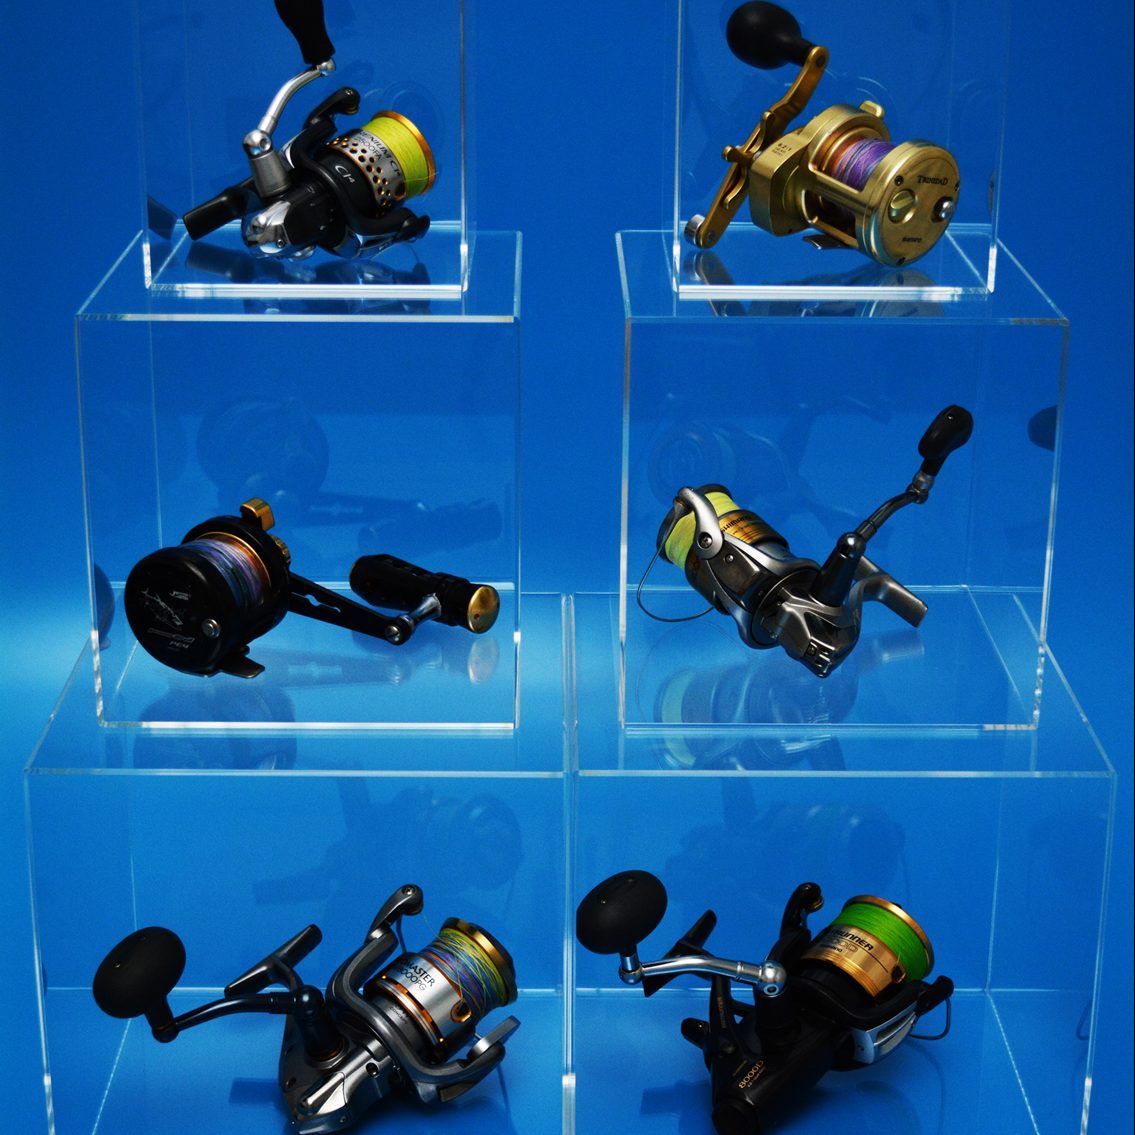 Clear Acrylic display cubes holding fishing reels, stacked on top of each other